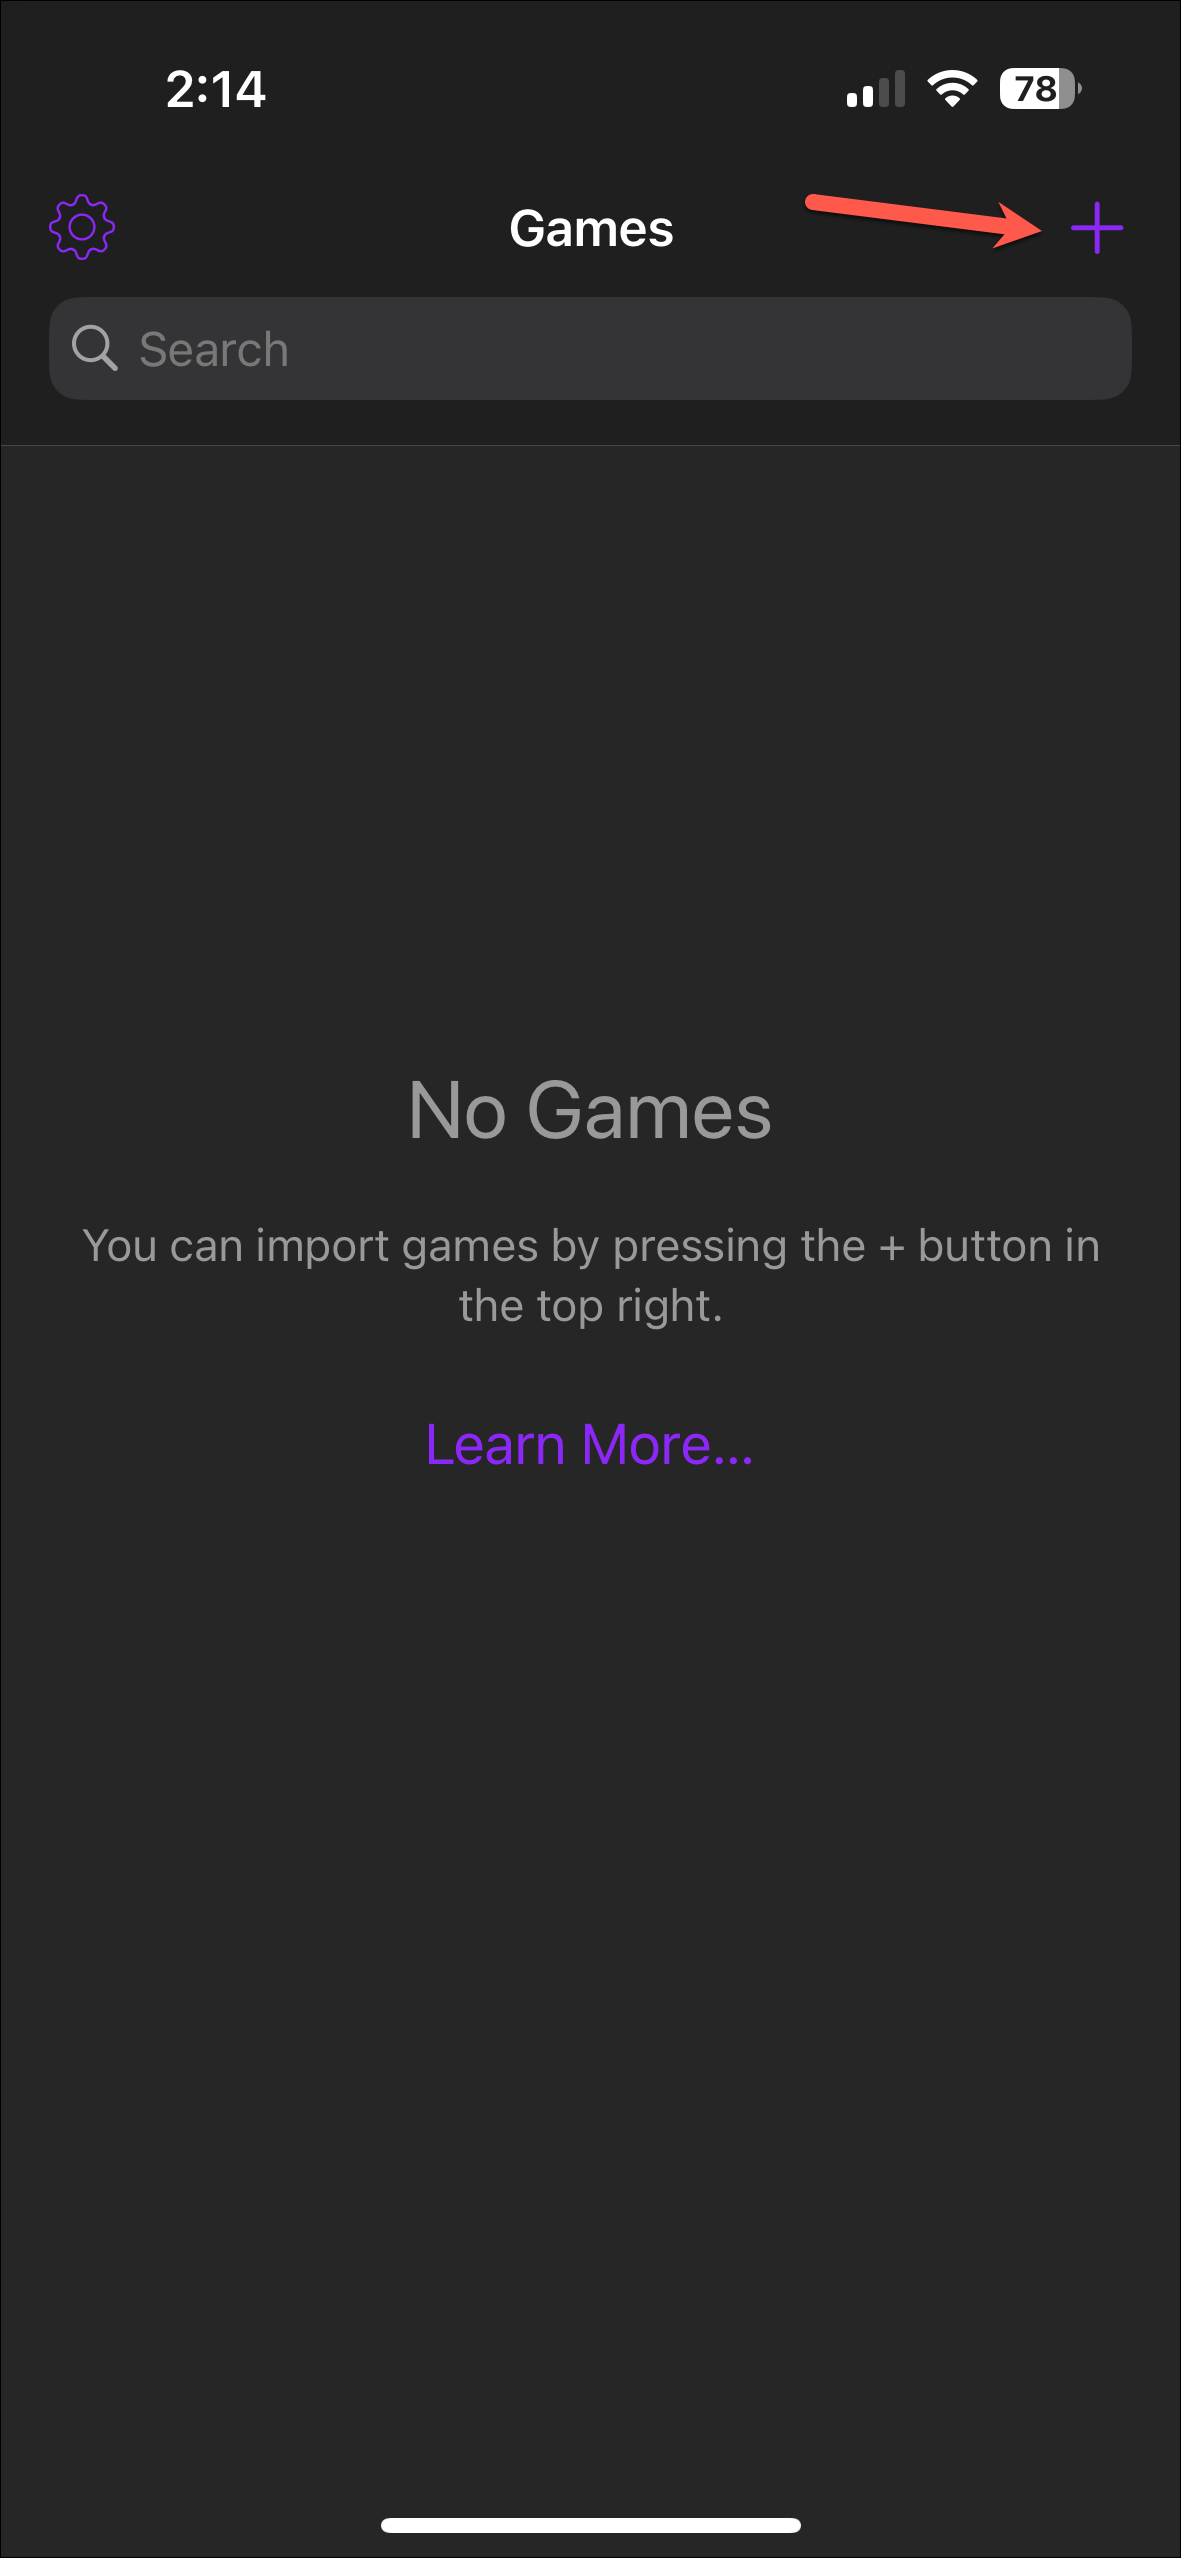 How to Play Retro Games with Delta on iPhone